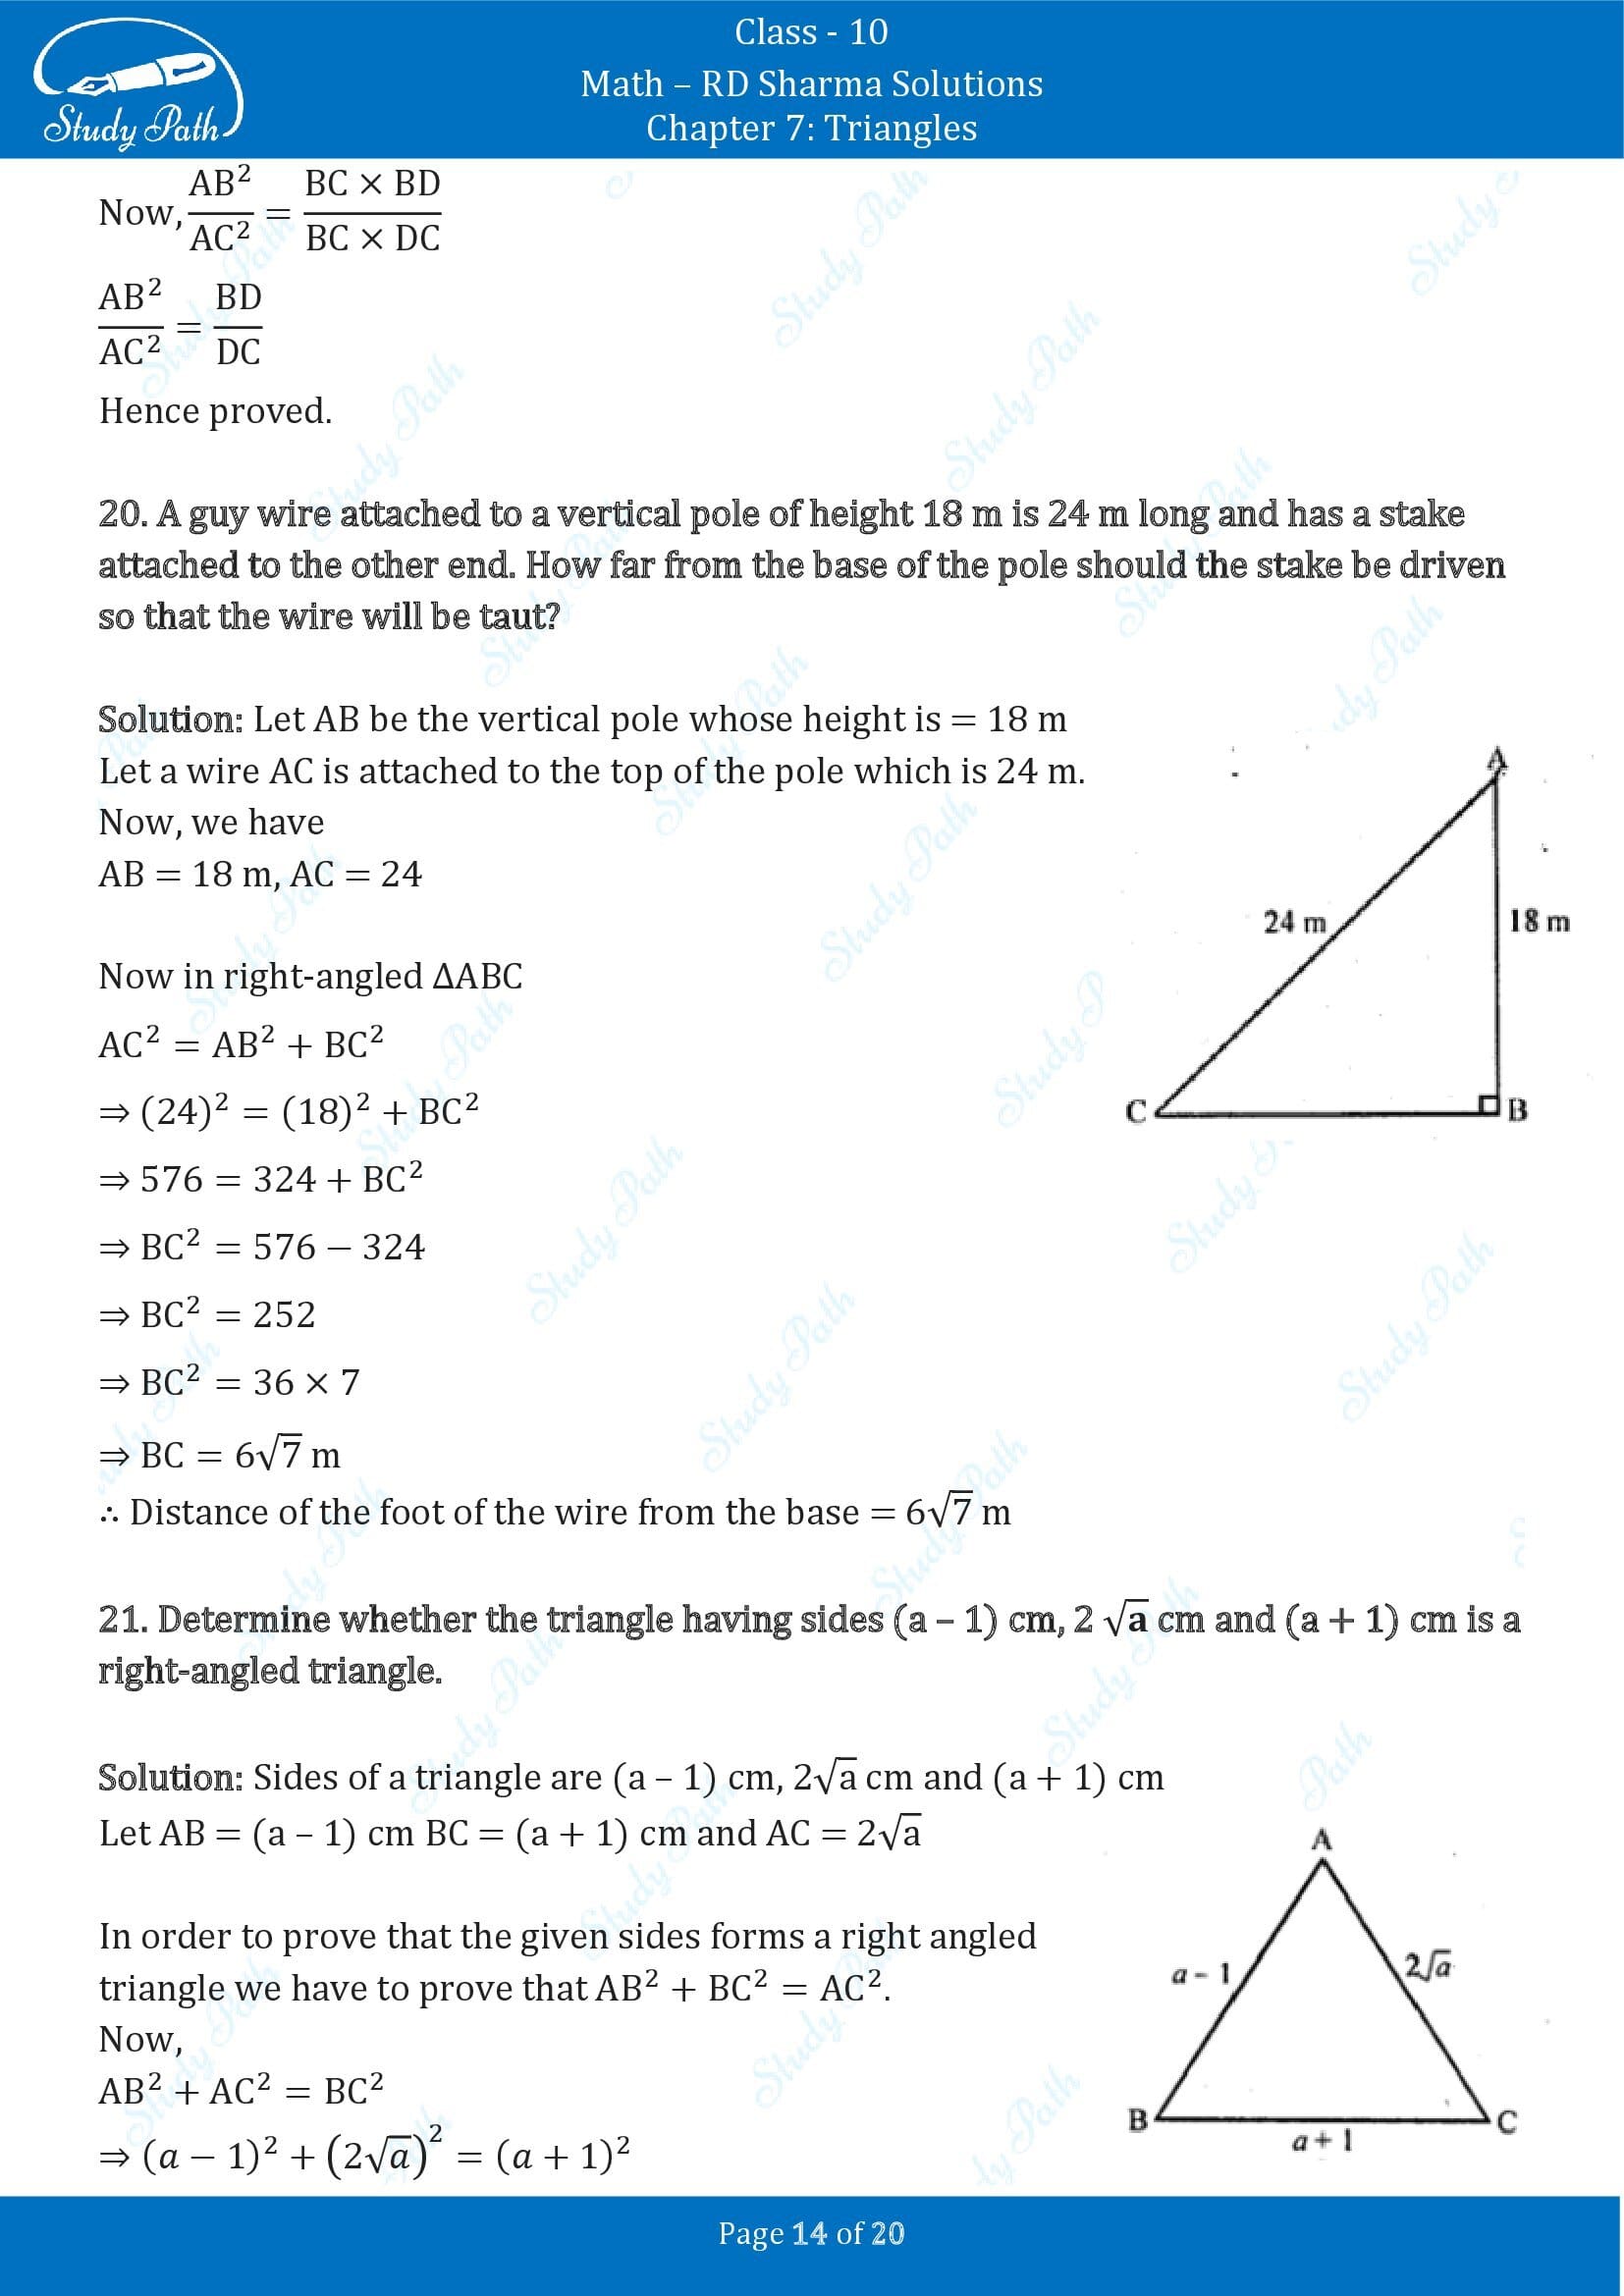 RD Sharma Solutions Class 10 Chapter 7 Triangles Exercise 7.7 00014